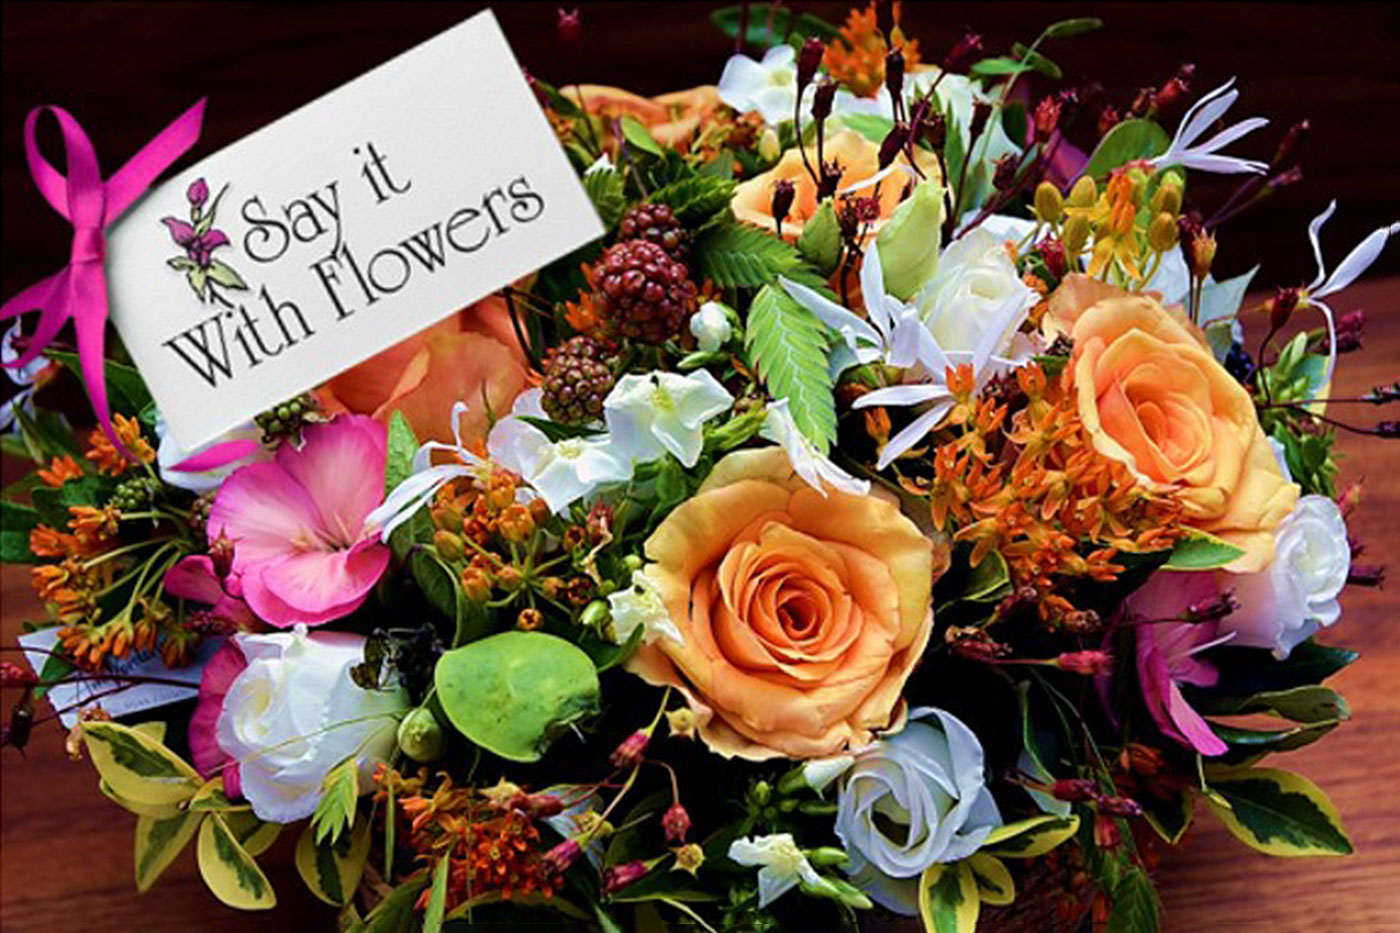 basket of flowers with note saying Say it with flowers